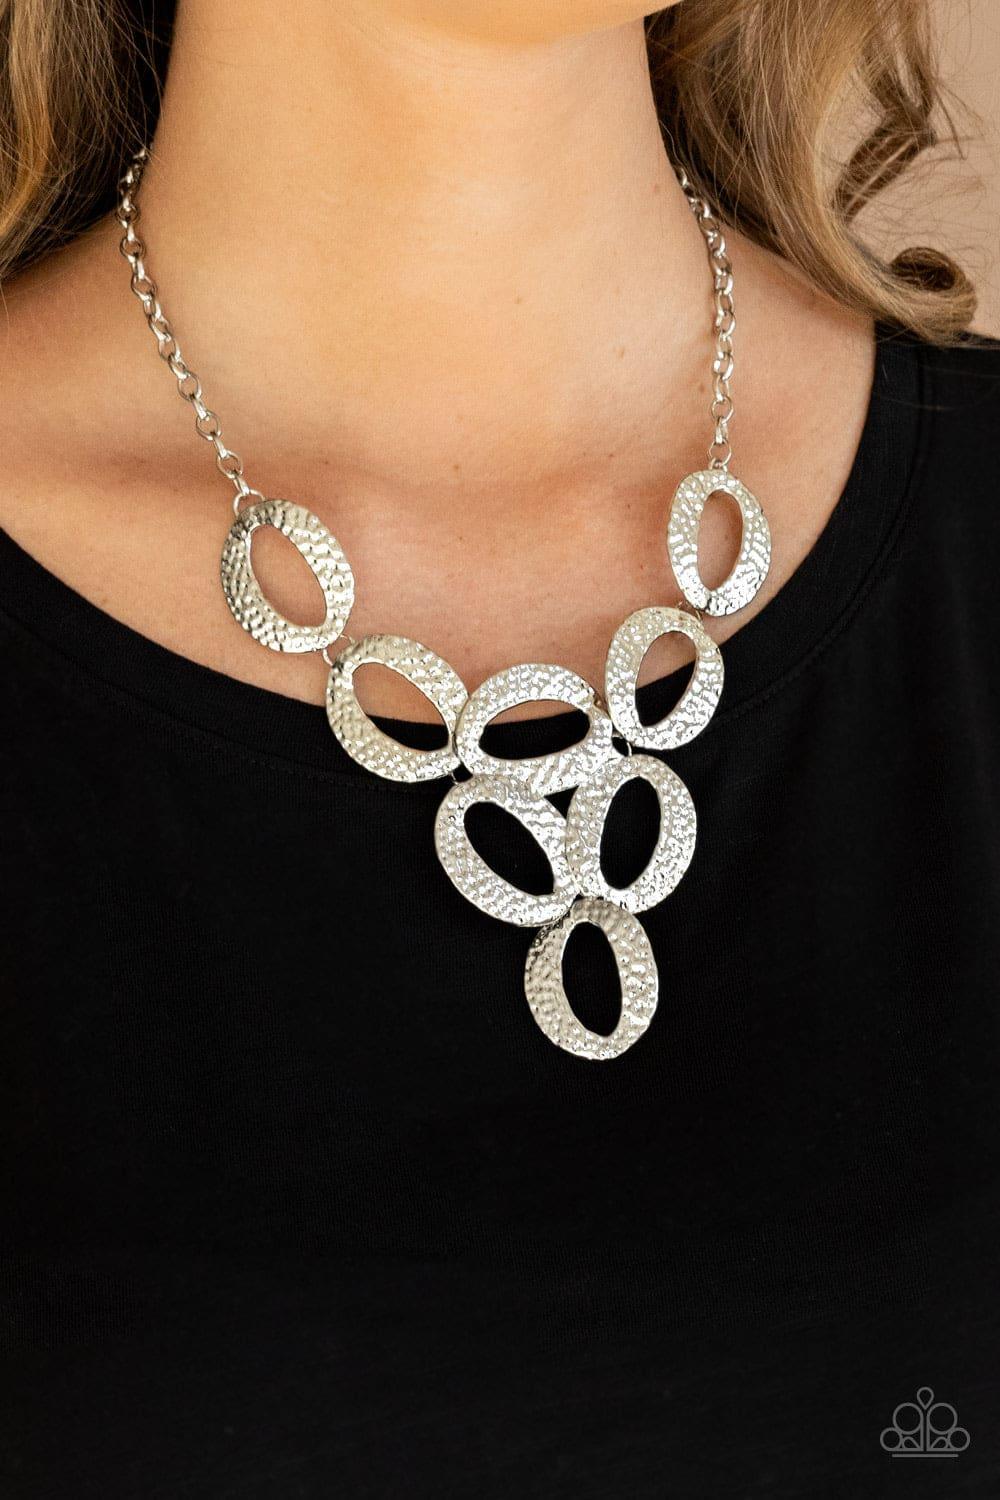 Paparazzi Accessories - Oval The Limit - Silver Necklace - Bling by JessieK